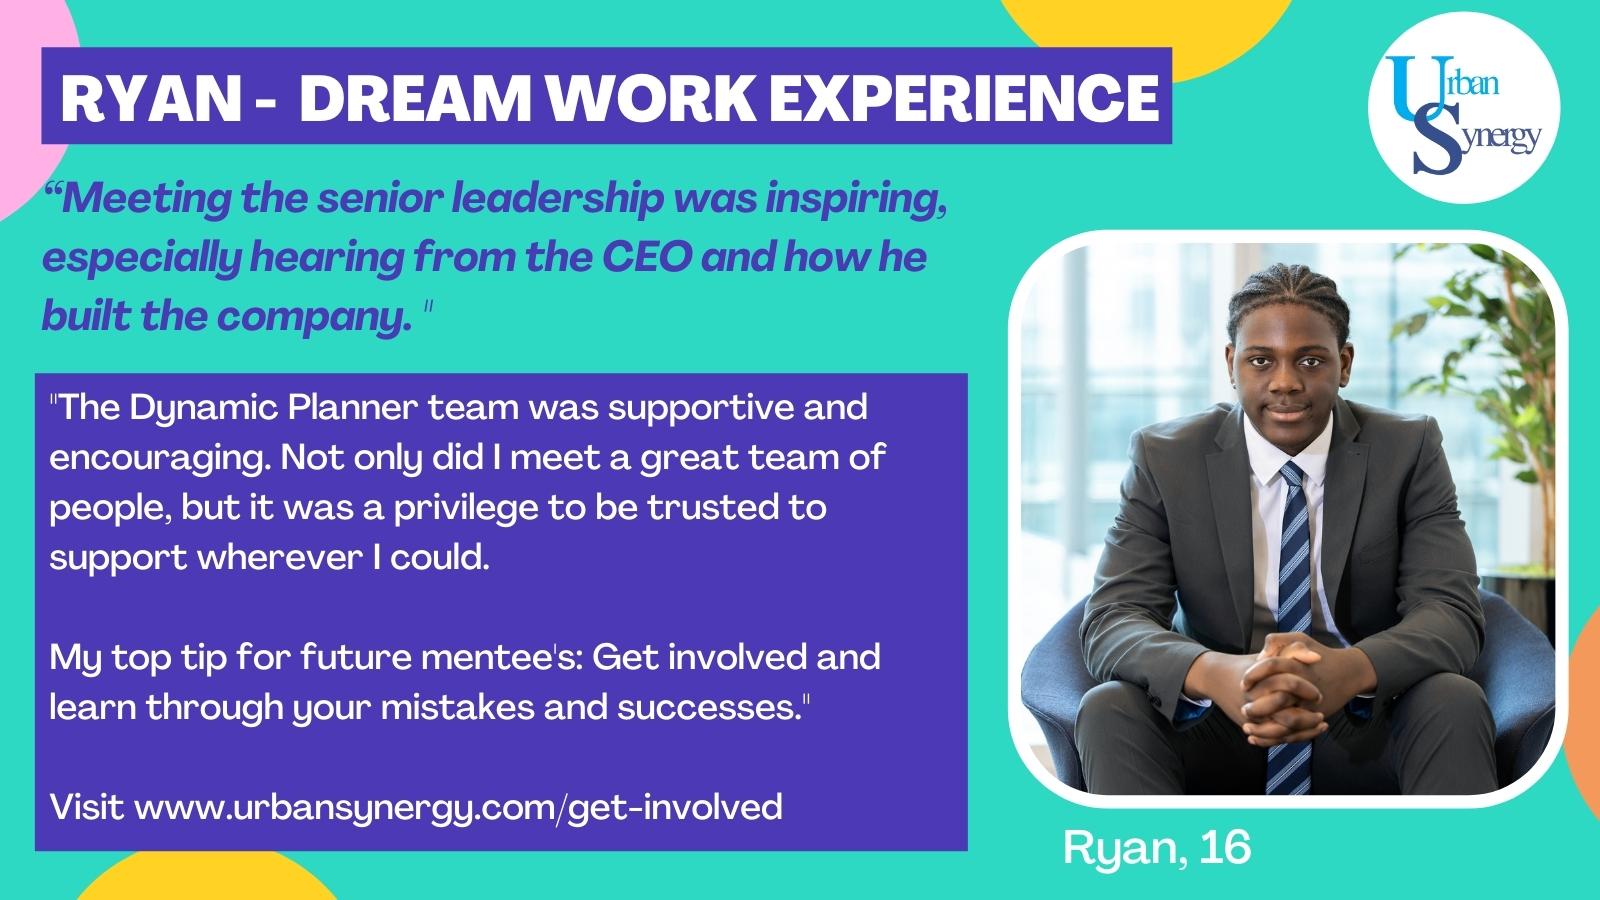 Ryan - dream work experience. “Getting to meet the senior leadership was inspiring, especially hearing from the CEO and how he built the company. "